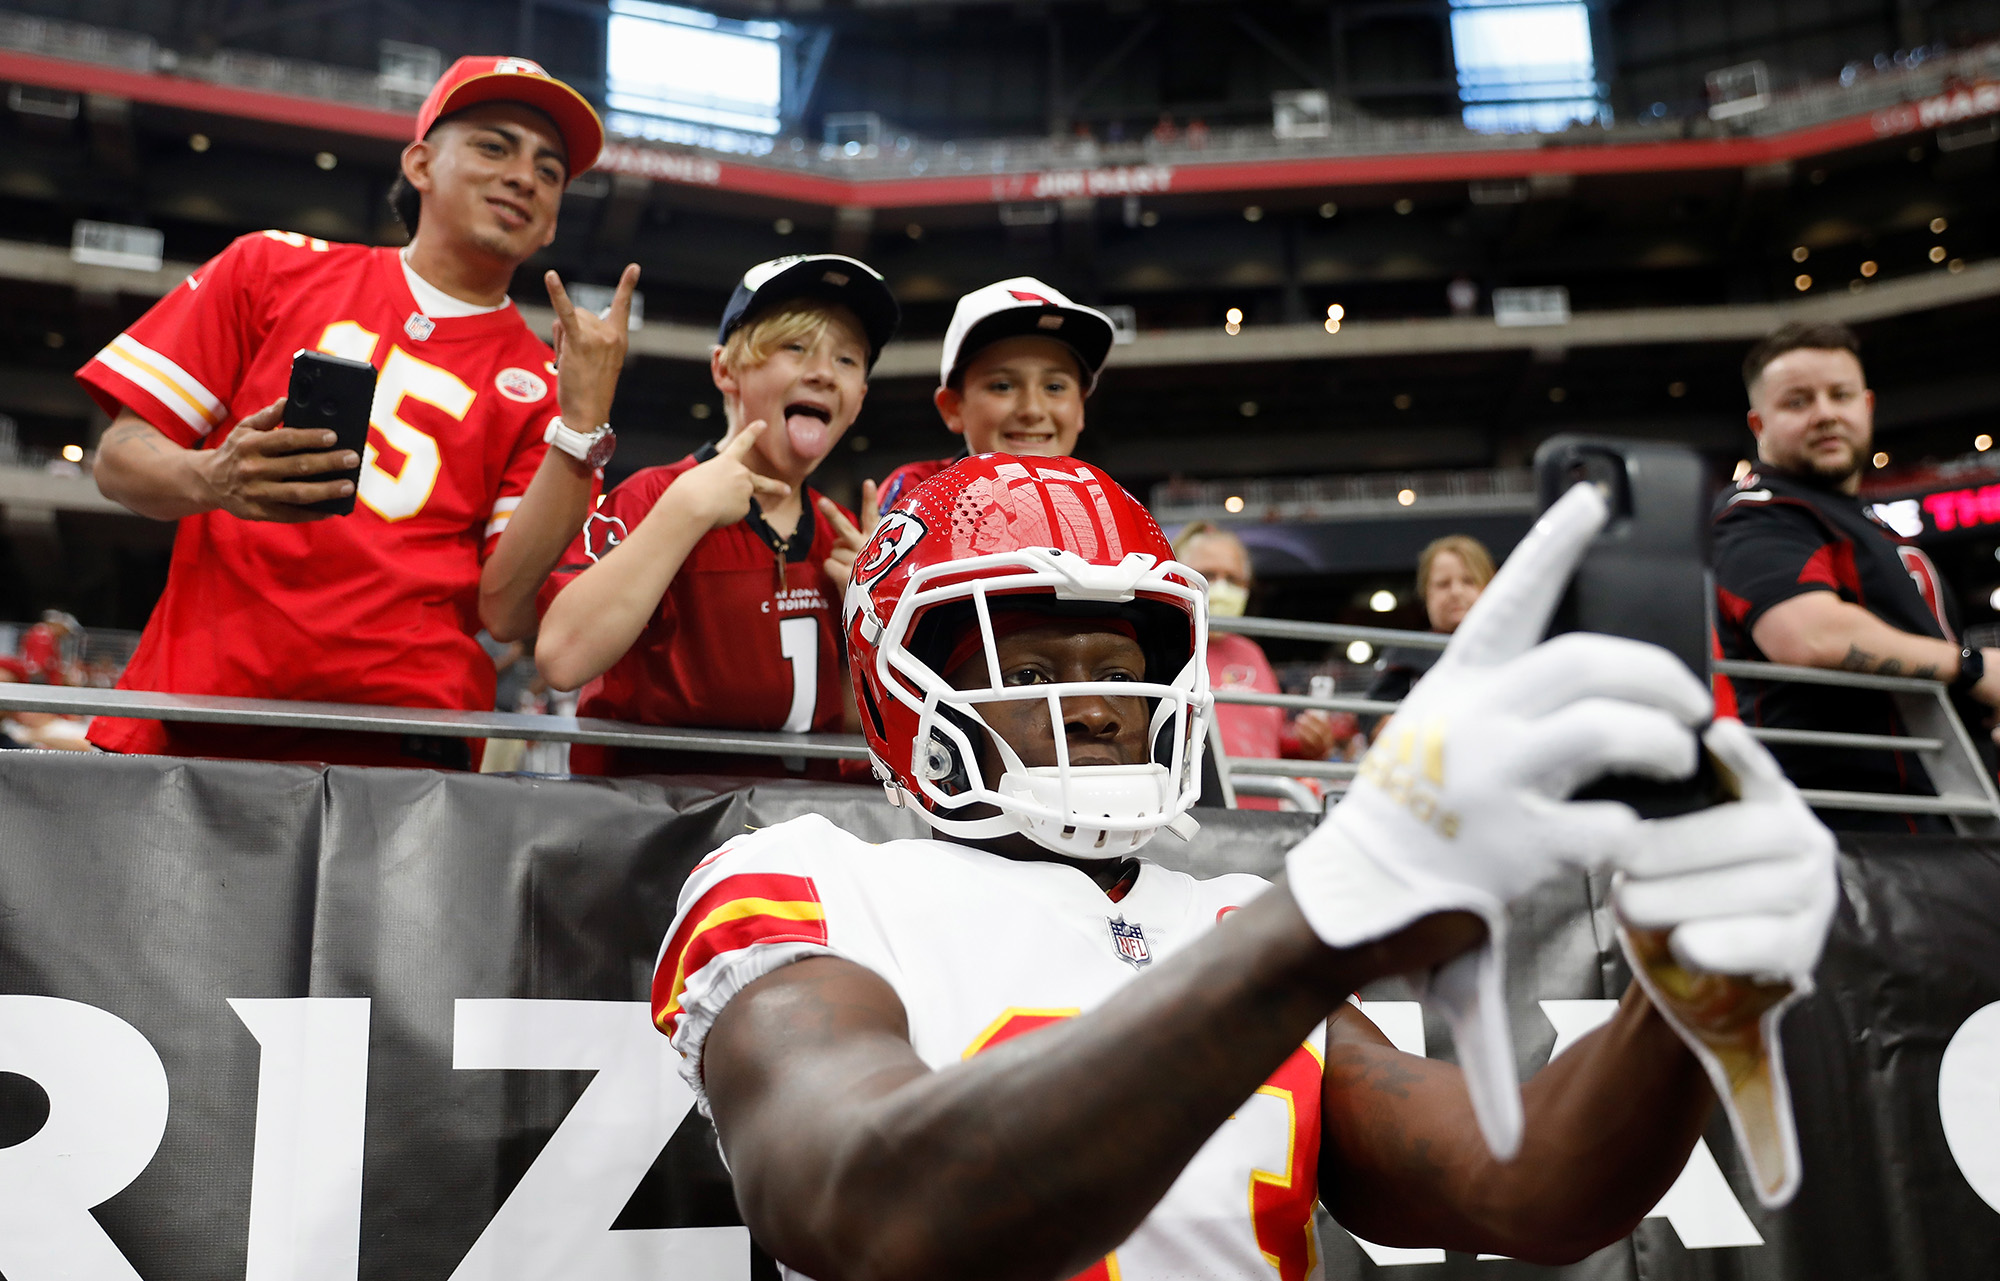 If Peacock ends up streaming a Chiefs playoff game, it won't affect viewers  in KC